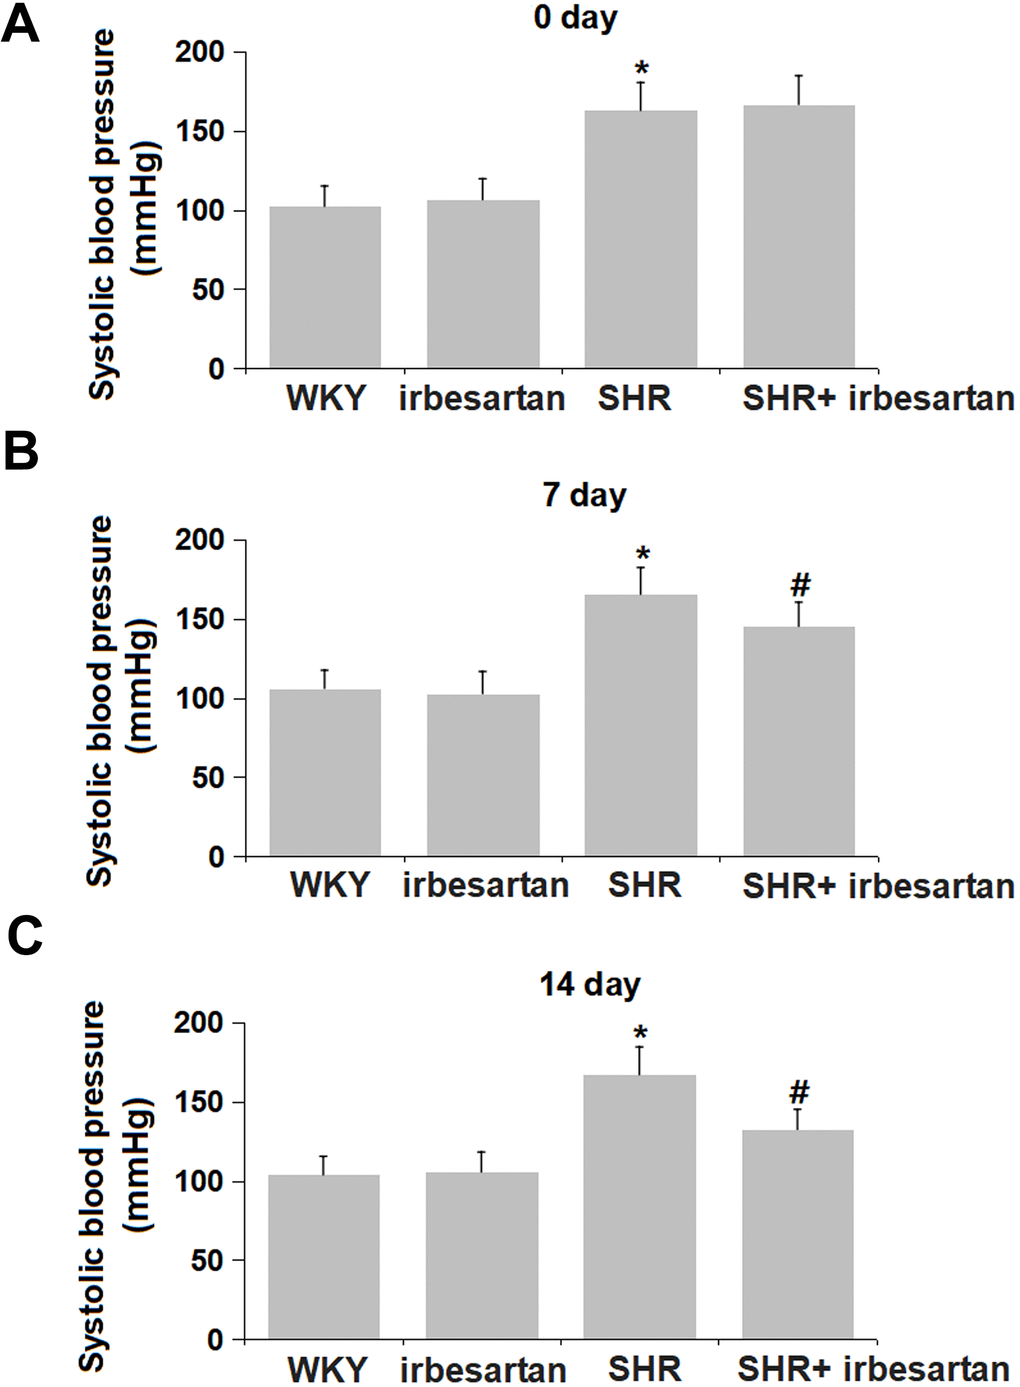 Irbesartan repressed the hypertension in SHR rats. (A) The systolic blood pressure on Day 0 post-dosing. (B) The systolic blood pressure on Day 7 post-dosing. (C) The systolic blood pressure on Day 14 post-dosing (n=6, *, P